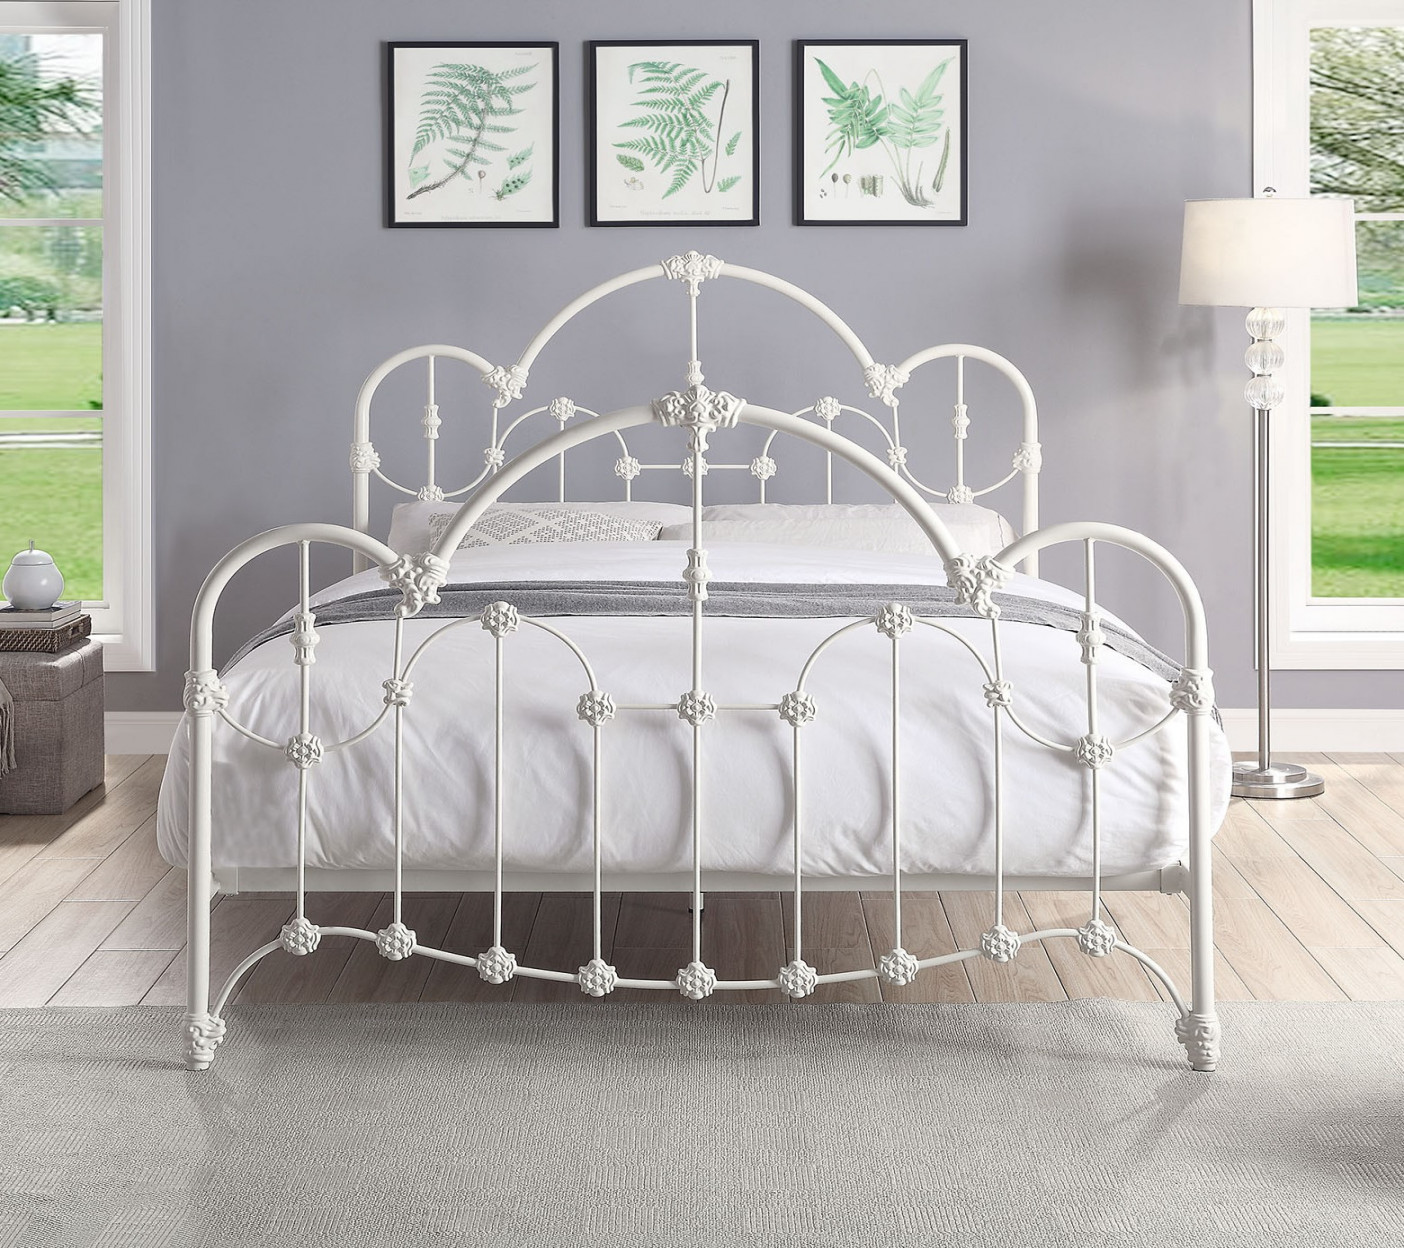 Wrought Iron Queen Bed For Sale Clearance, SAVE %.